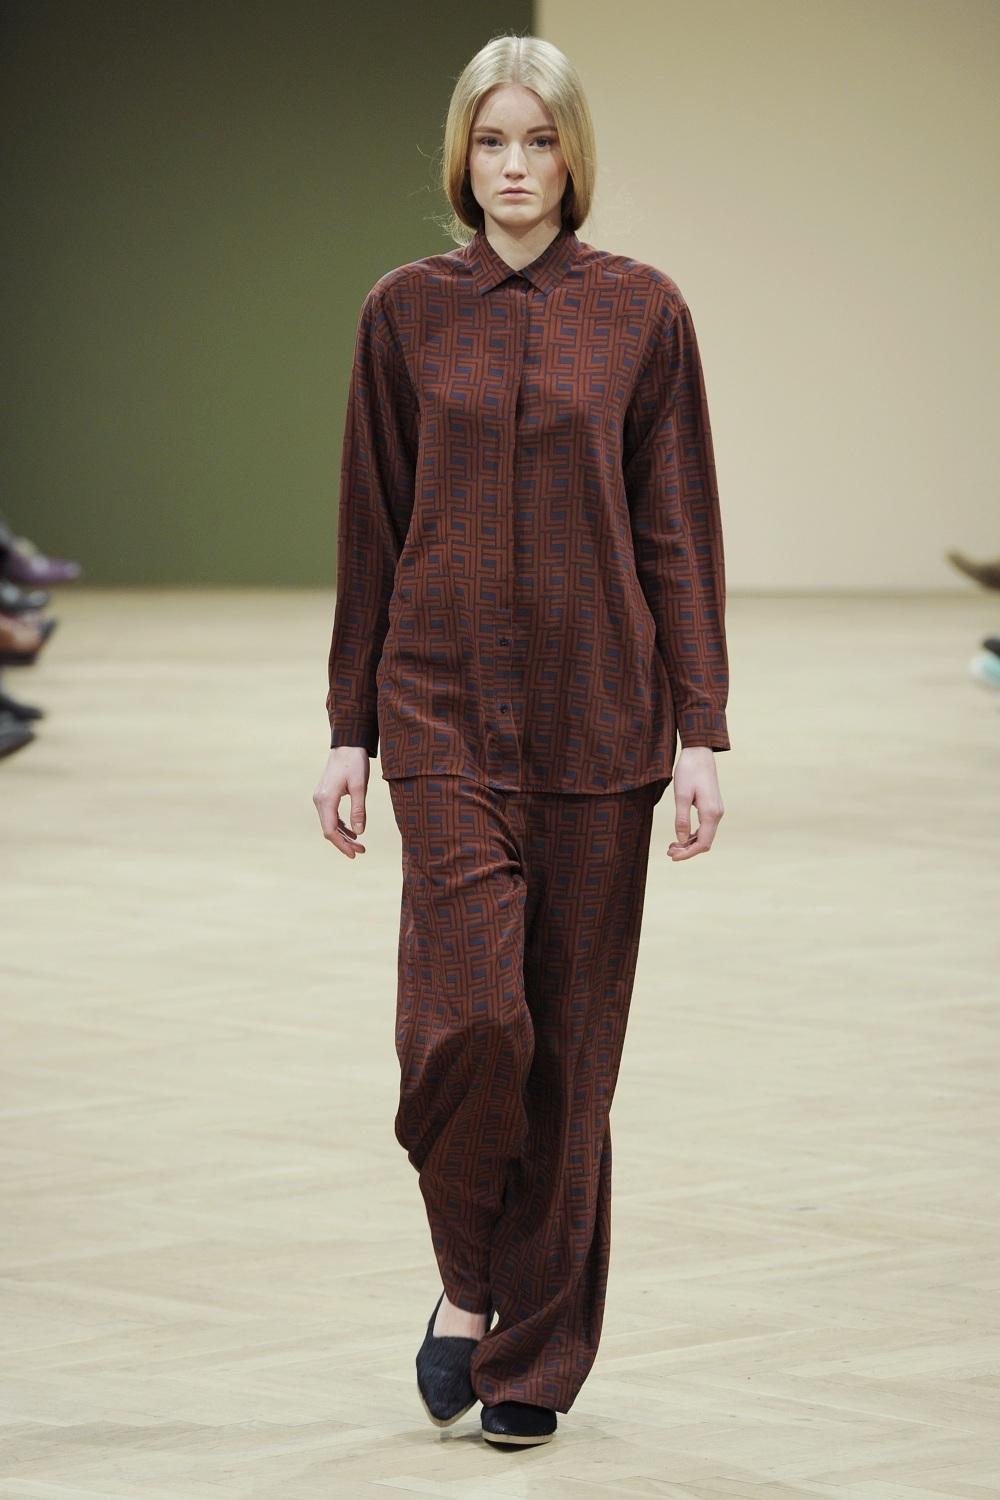 You are currently viewing Tendens 2013: Pyjamaslooket